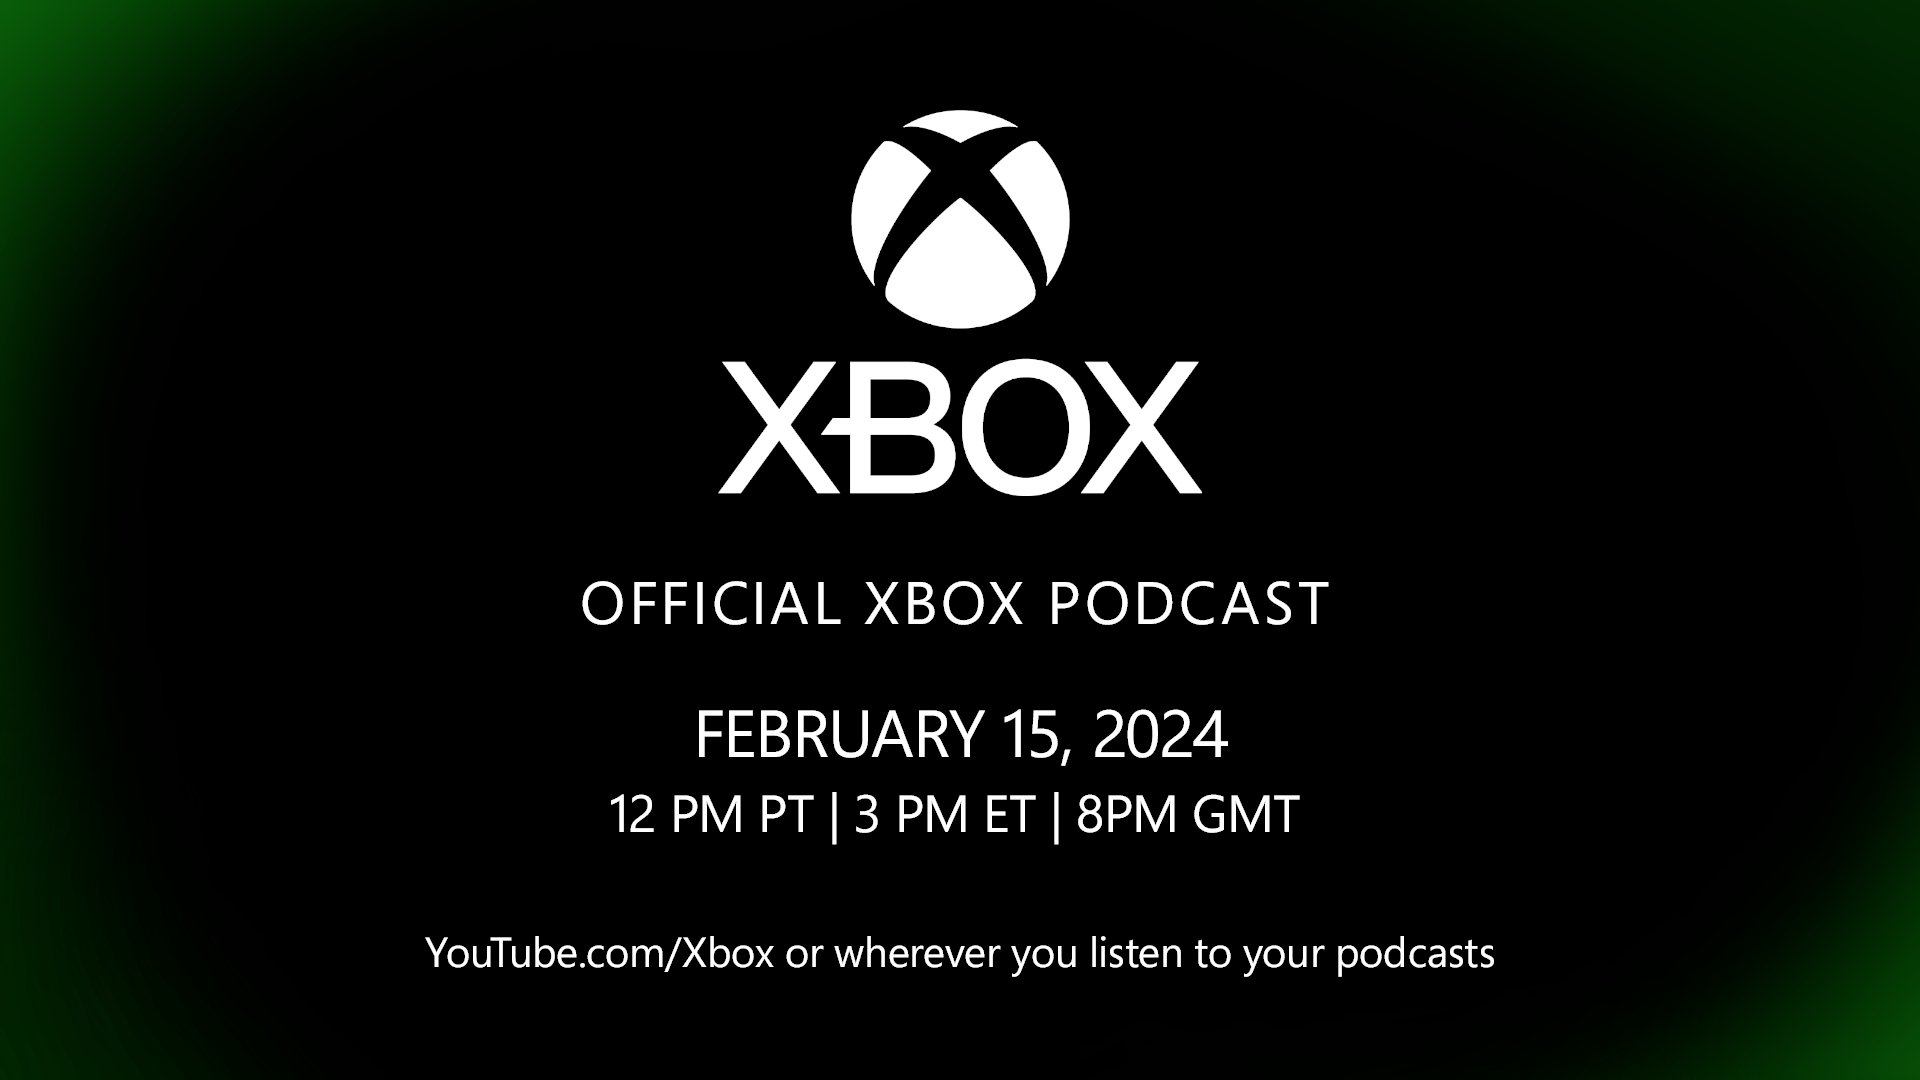 Xbox Official Podcast: February 15, 2024